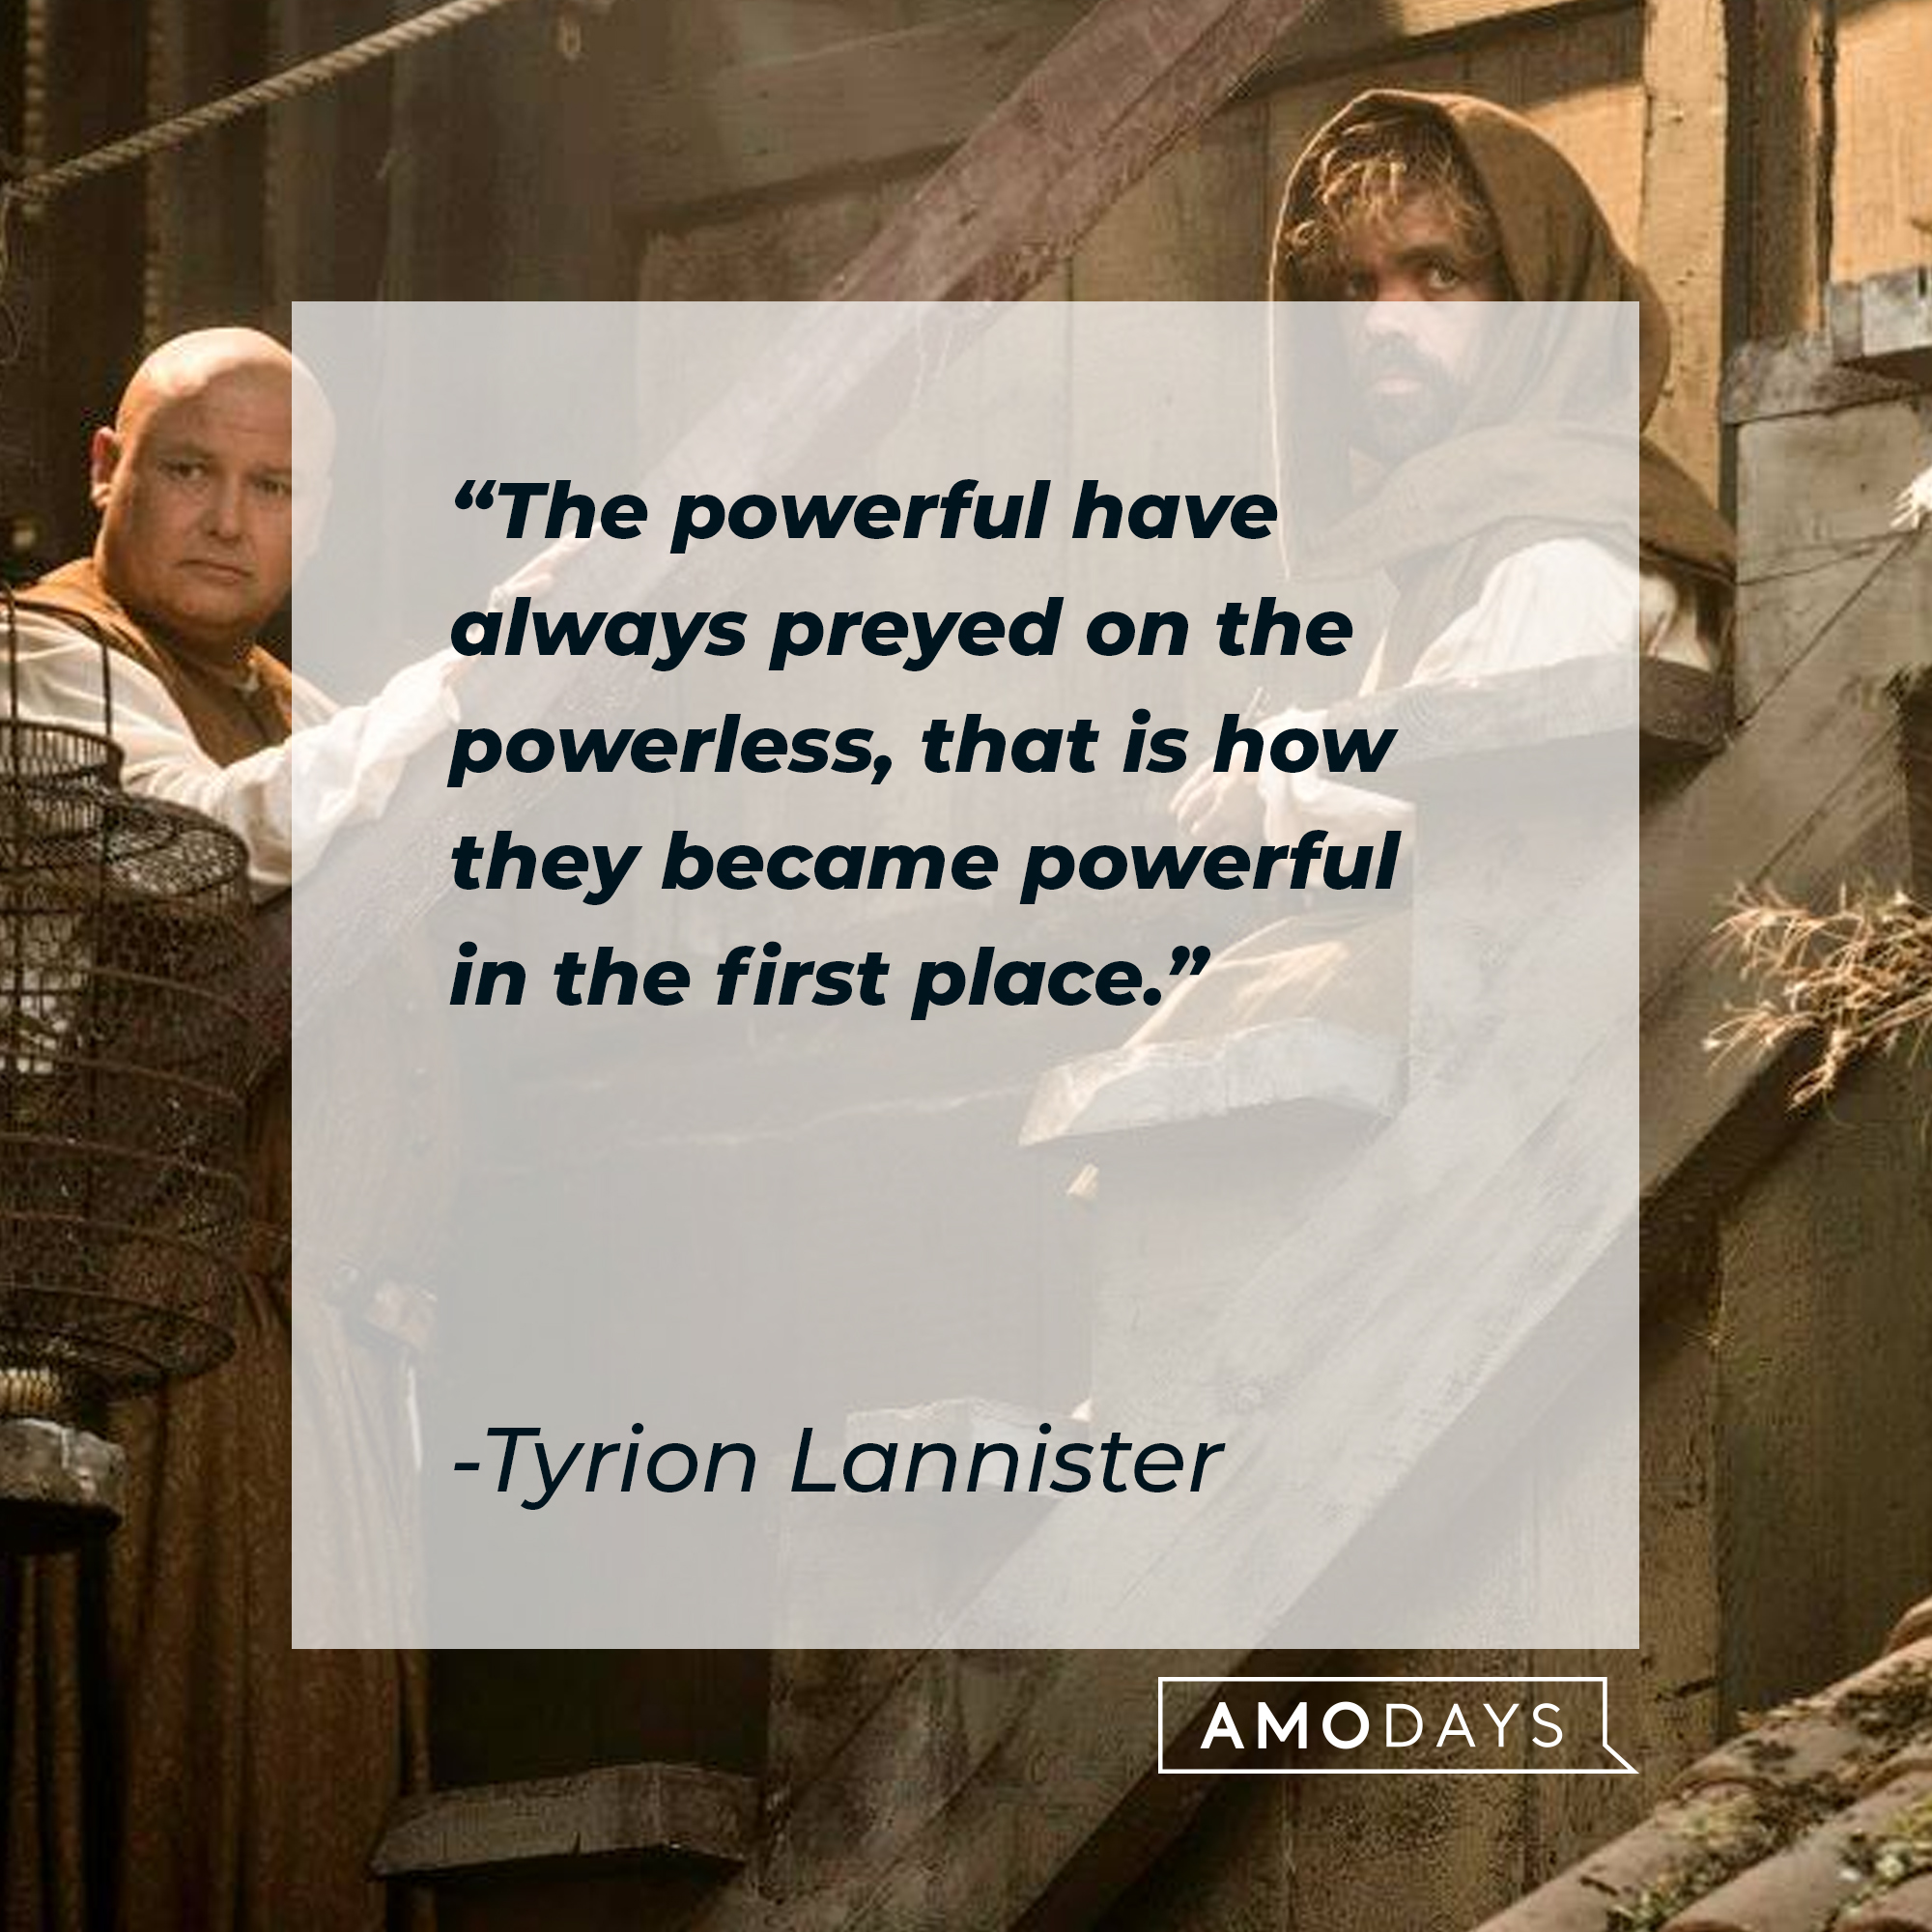 Tyrion Lannister's quote: “The powerful have always preyed on the powerless, that is how they became powerful in the first place.” | Source: facebook.com/GameOfThrones